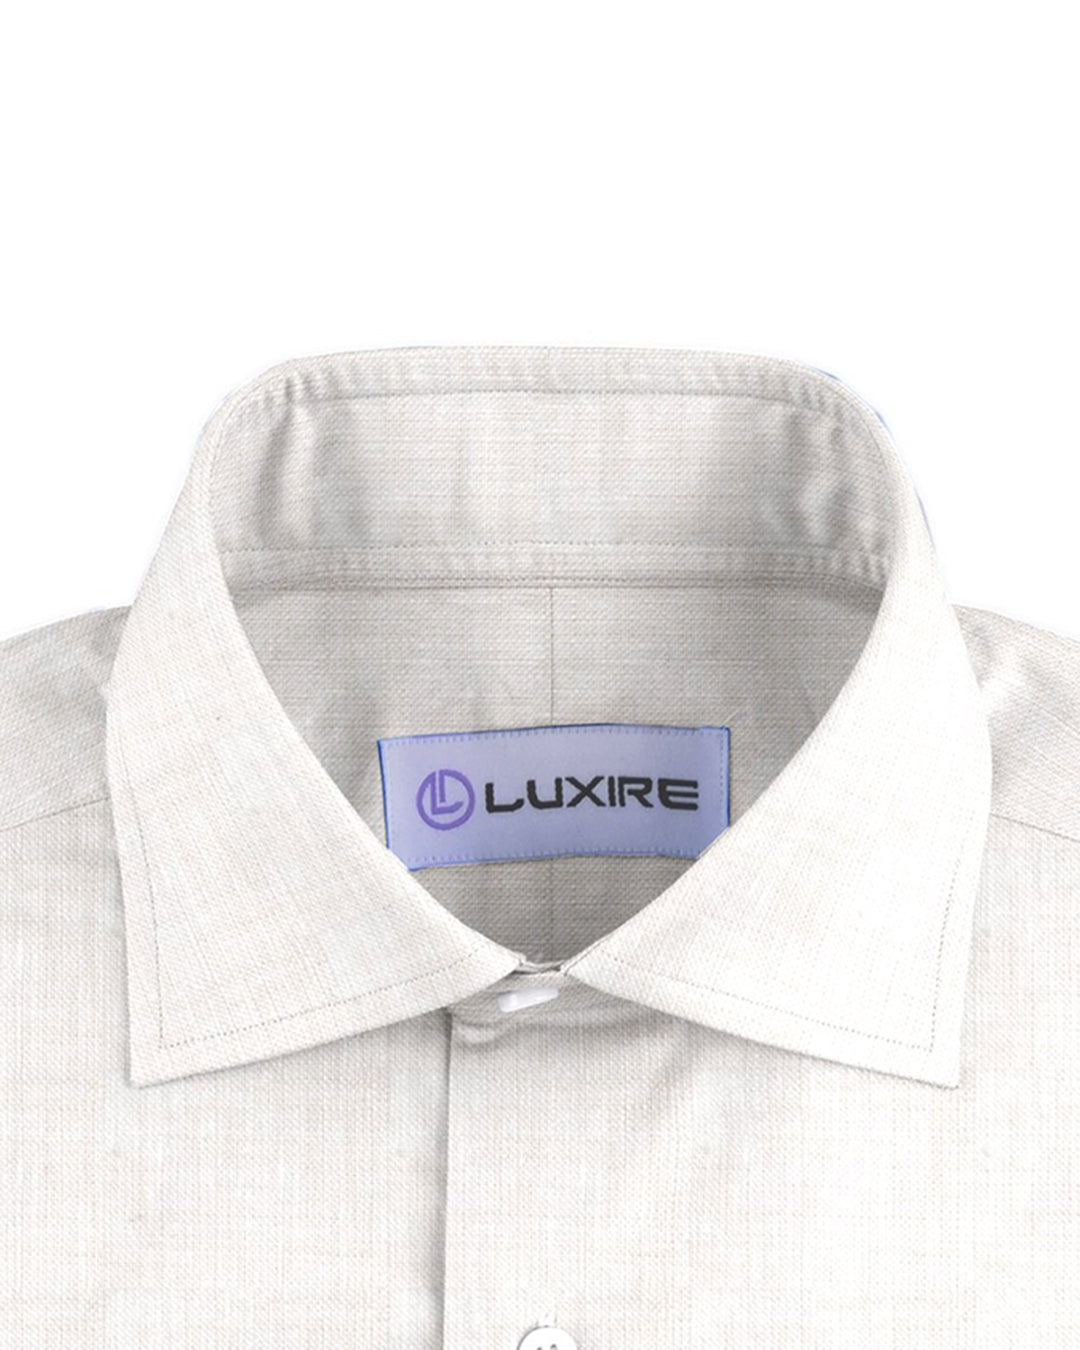 Collar of the custom linen shirt for men in textured ecru by Luxire Clothing